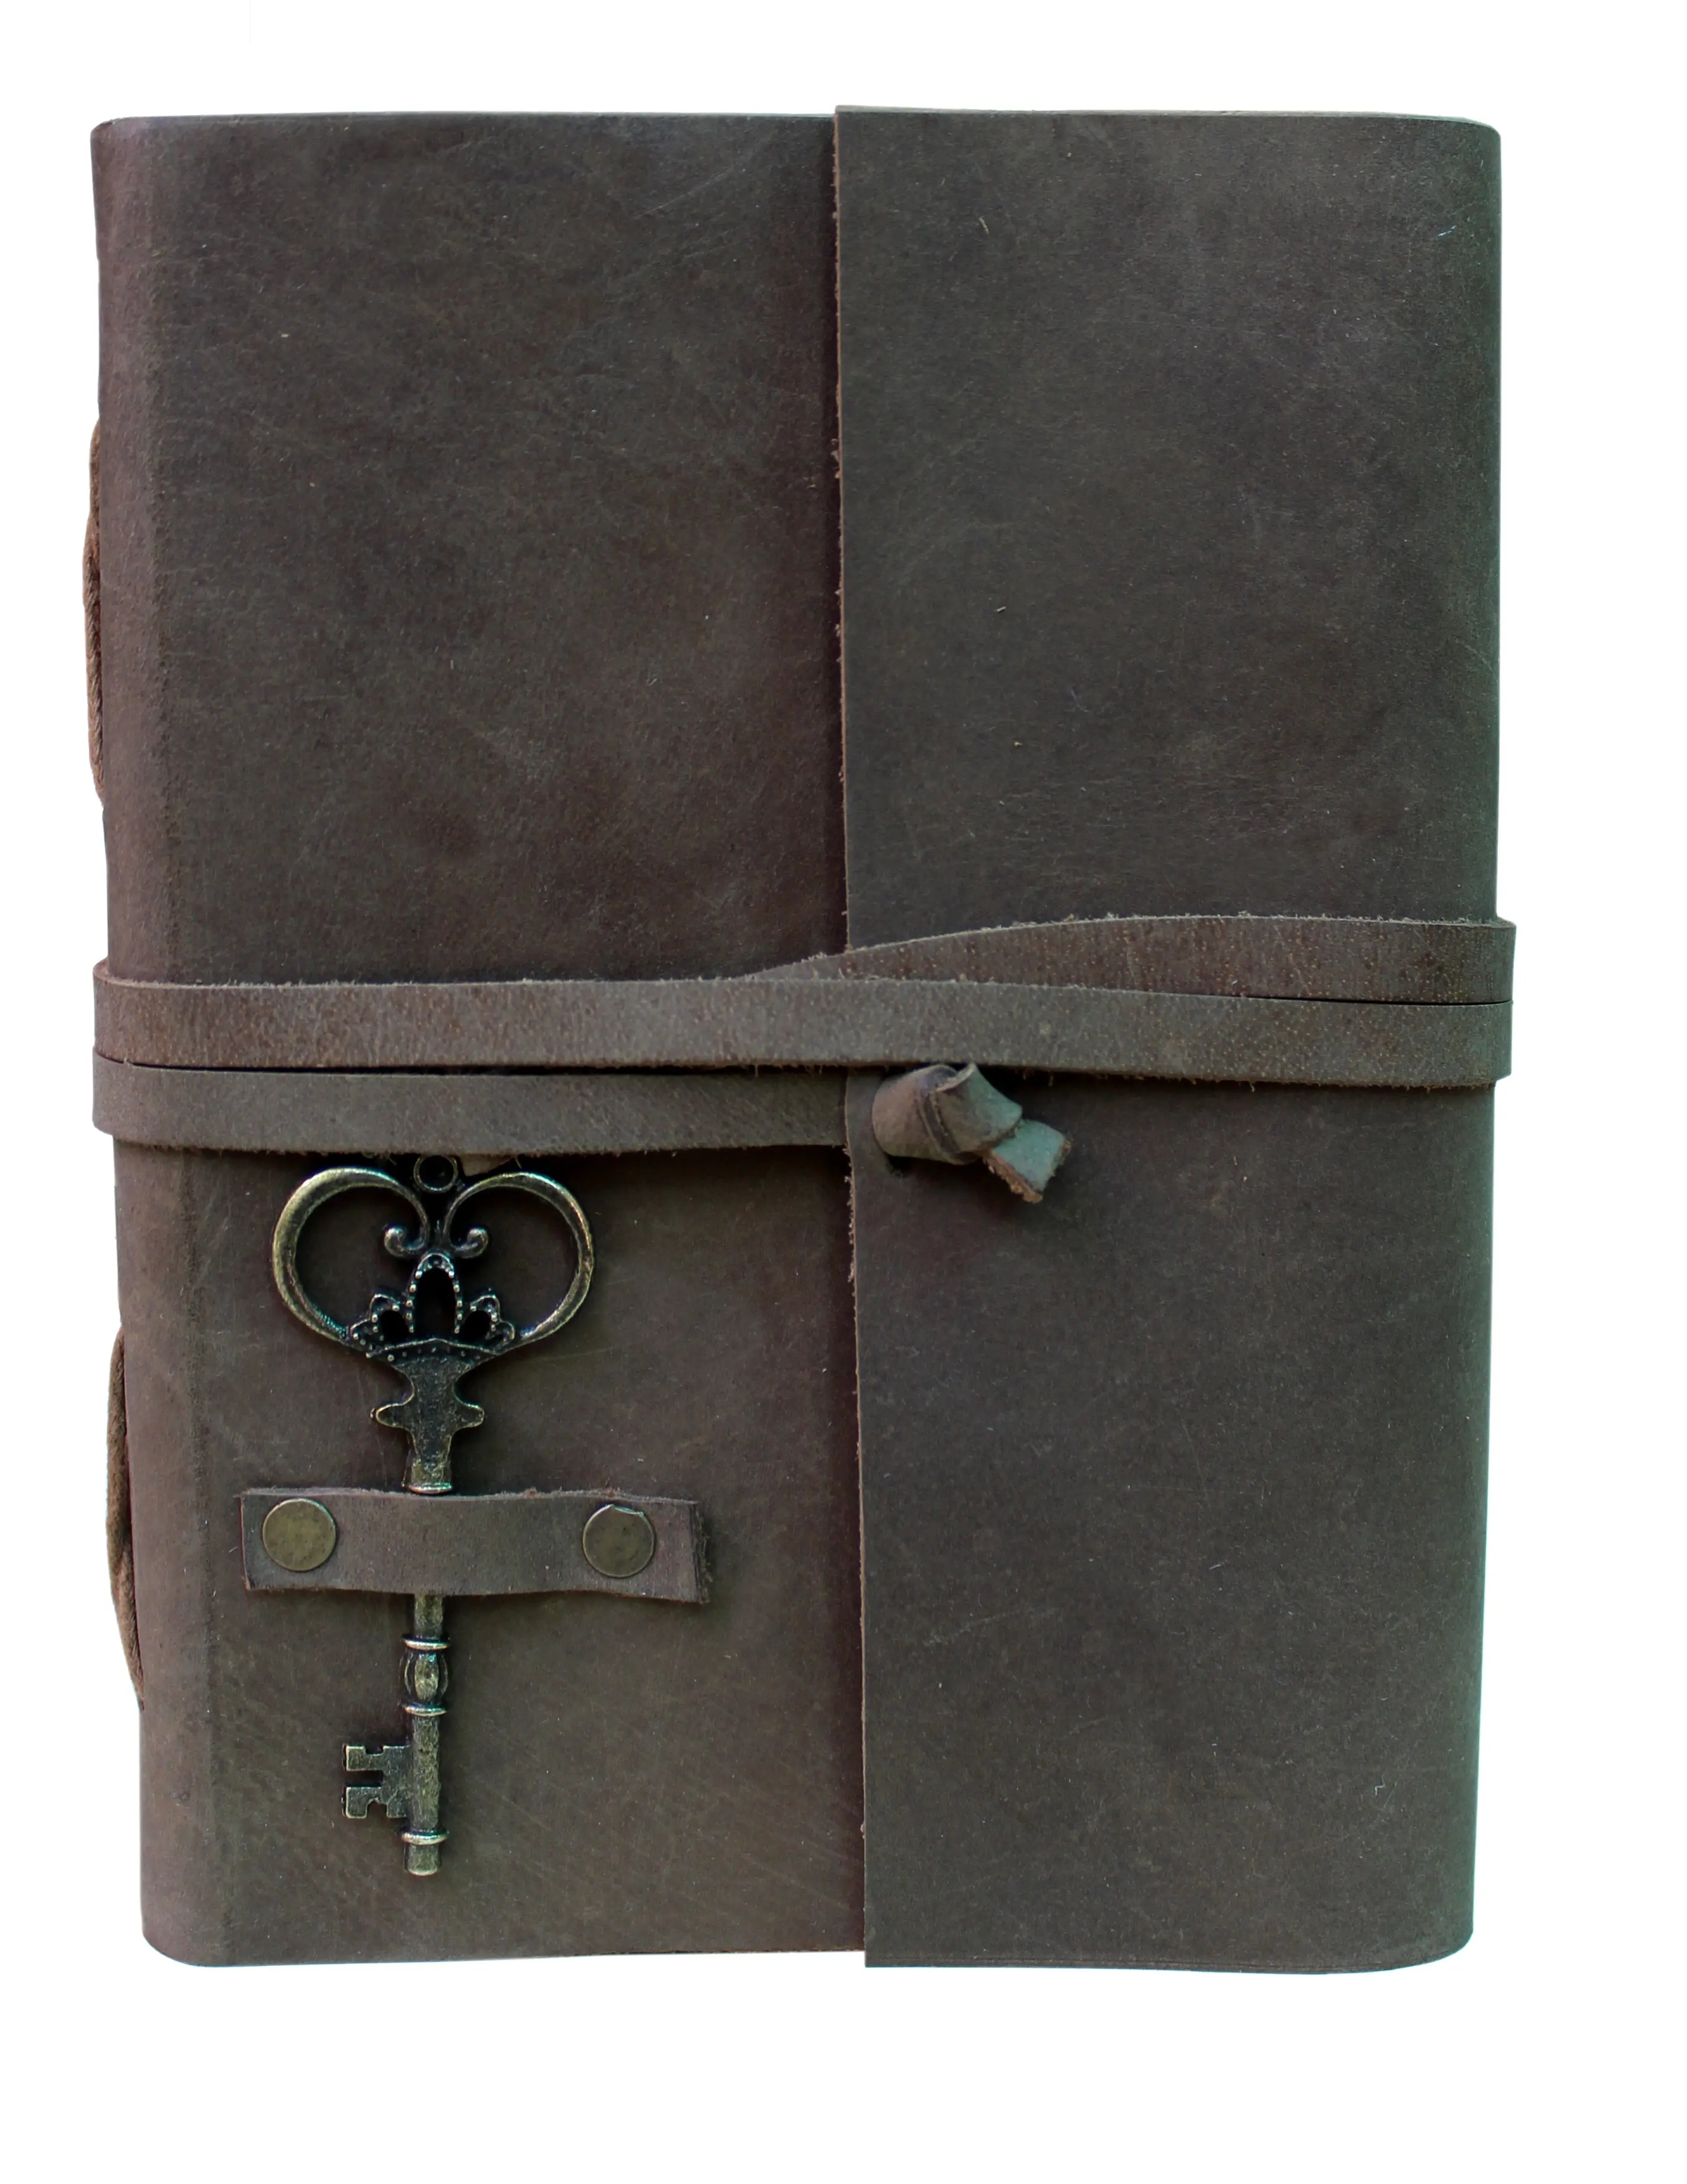 Pure leather Journal Handmade vintage side stitch leather diary with classic key lock closure leather journal.